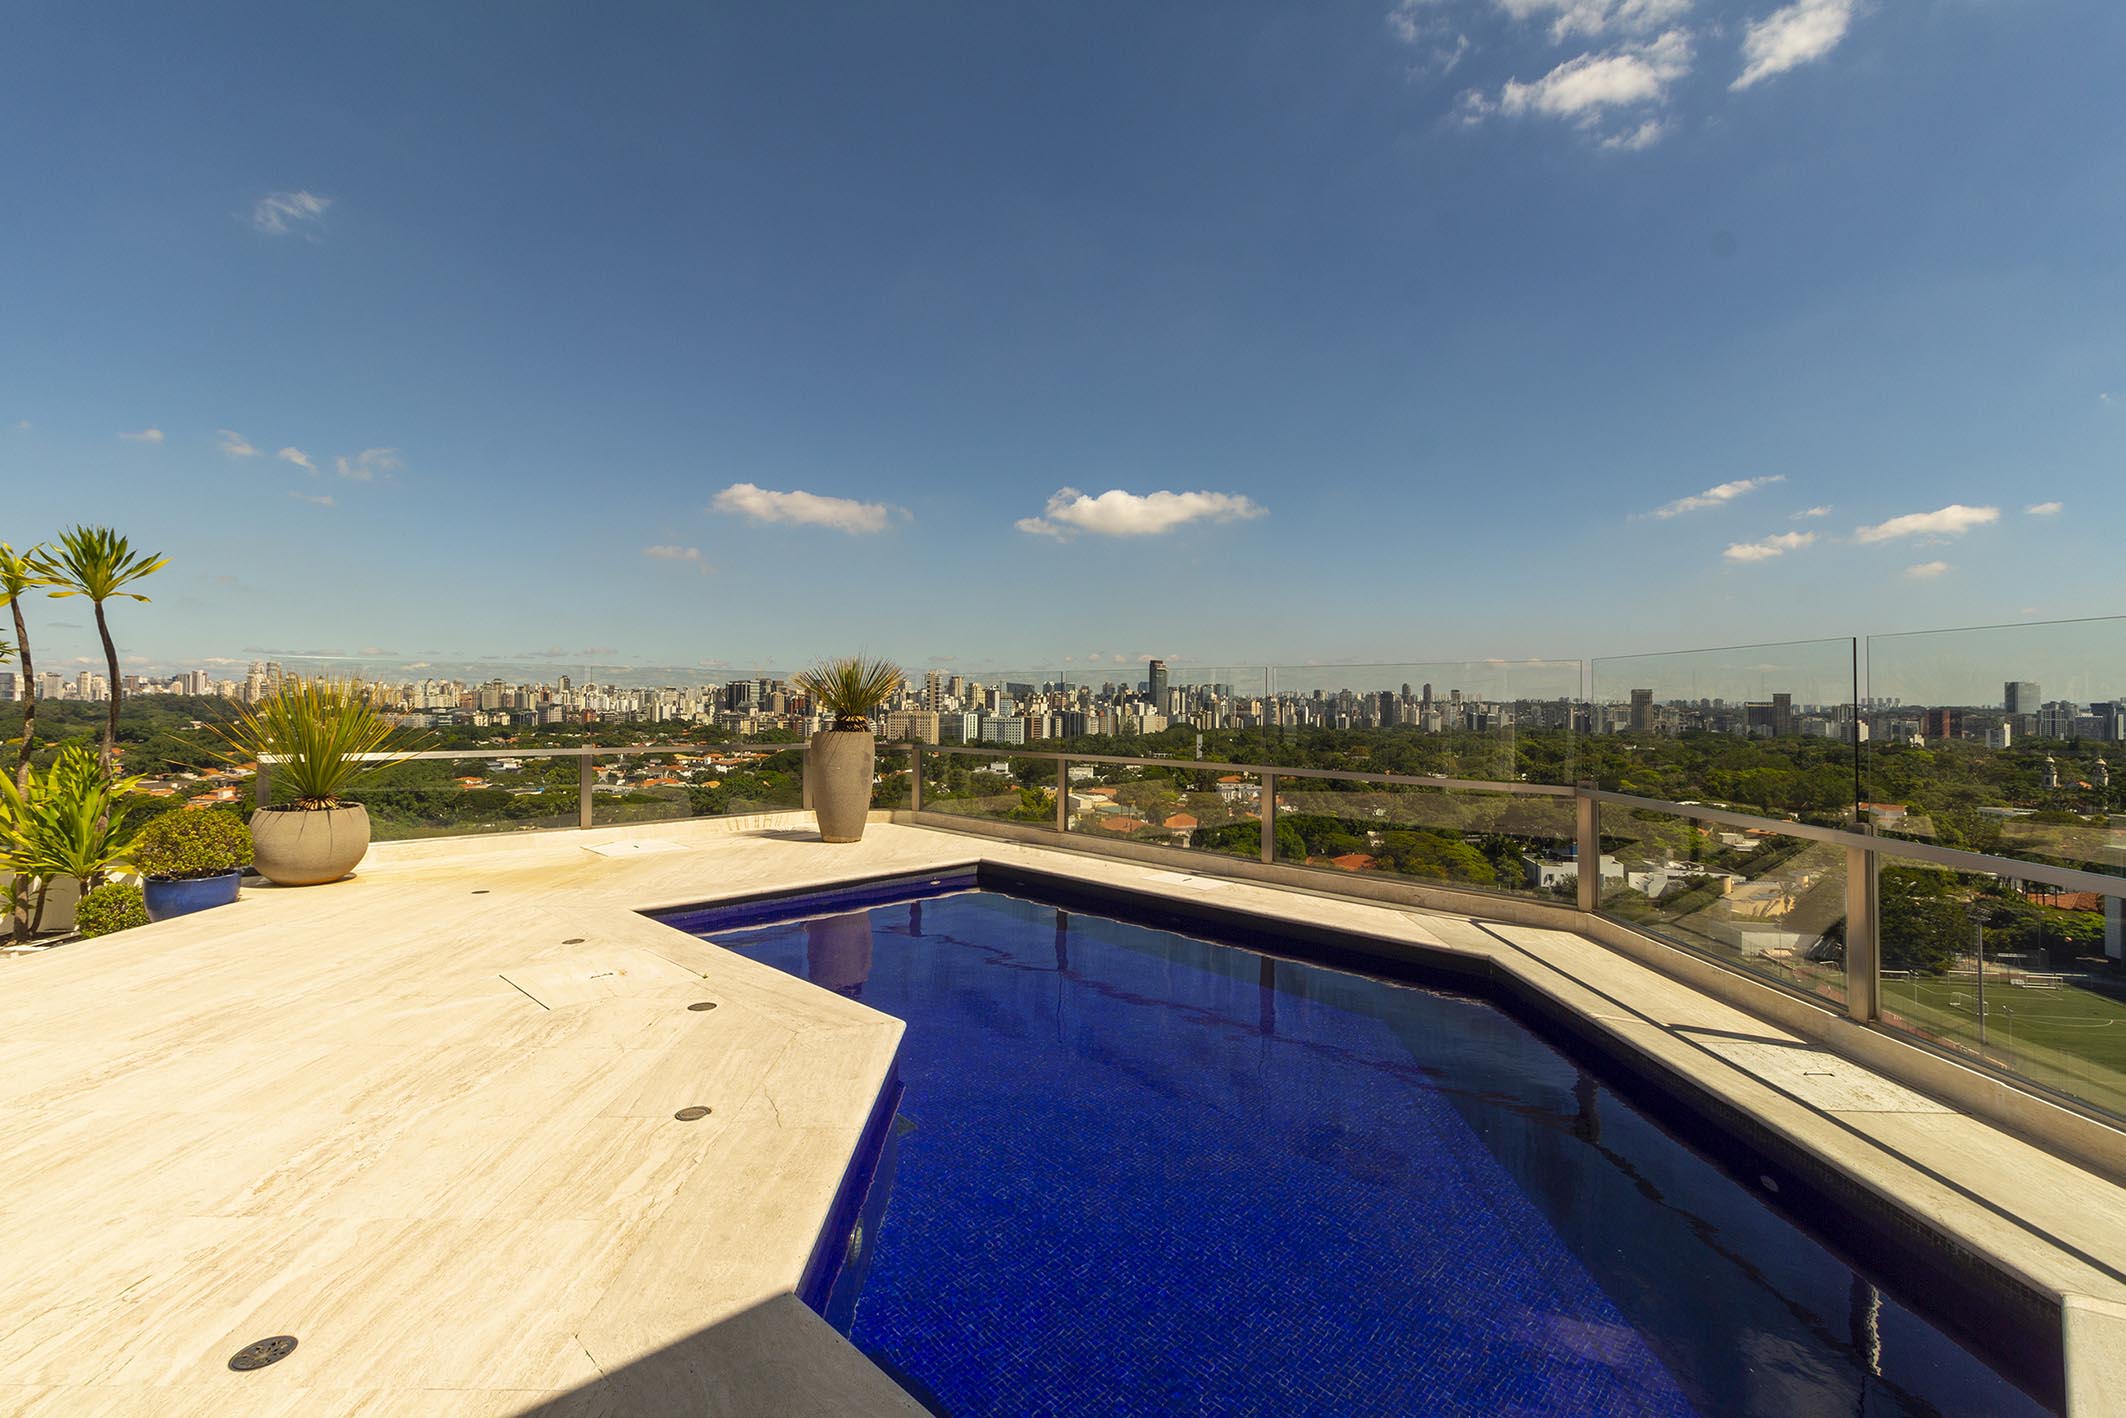 Penthouse with a 180° rooftop view of the city landscap